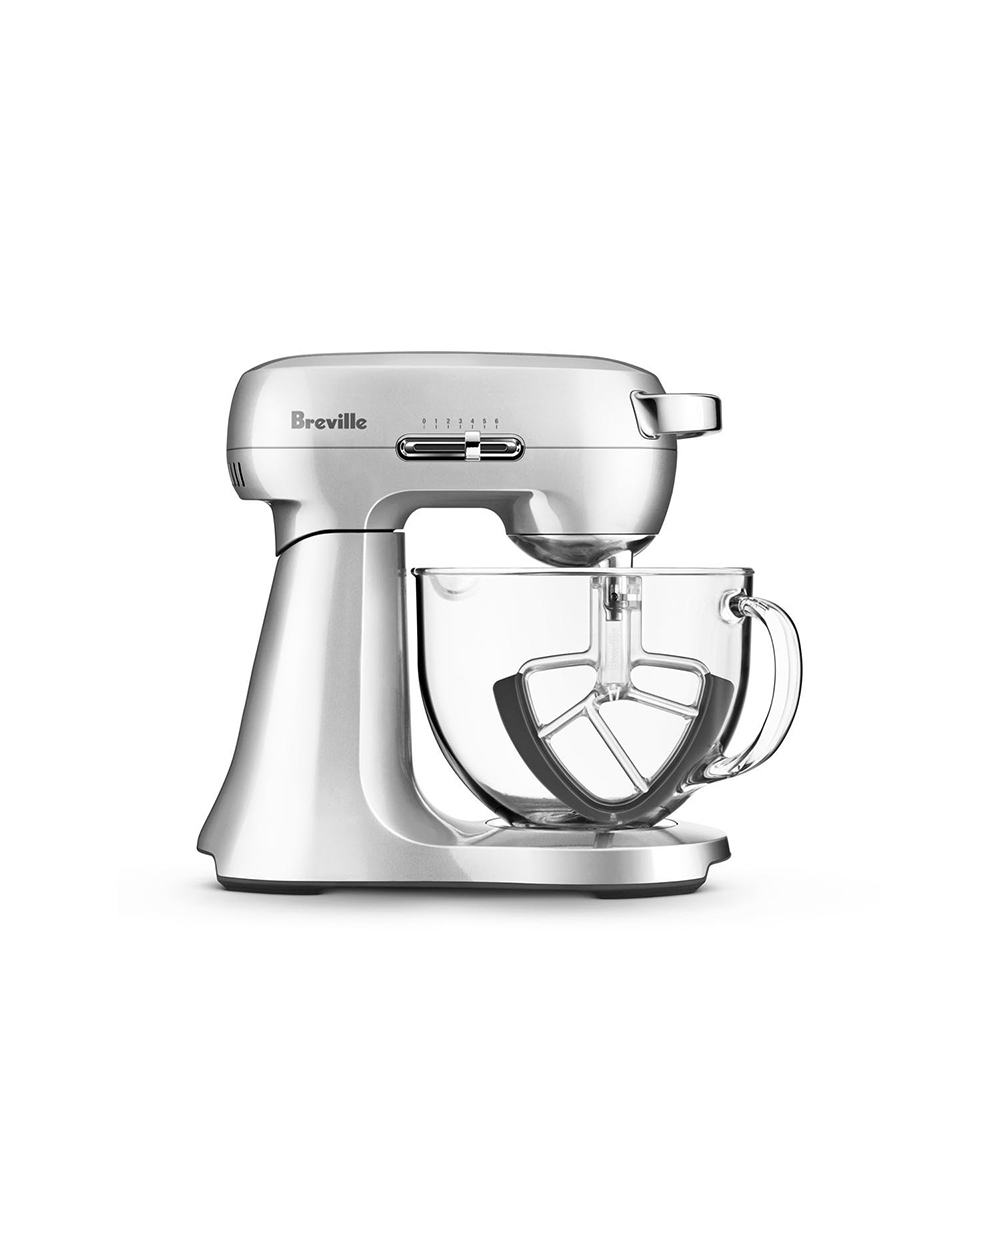 Breville mixer, $499 from Harvey Norman